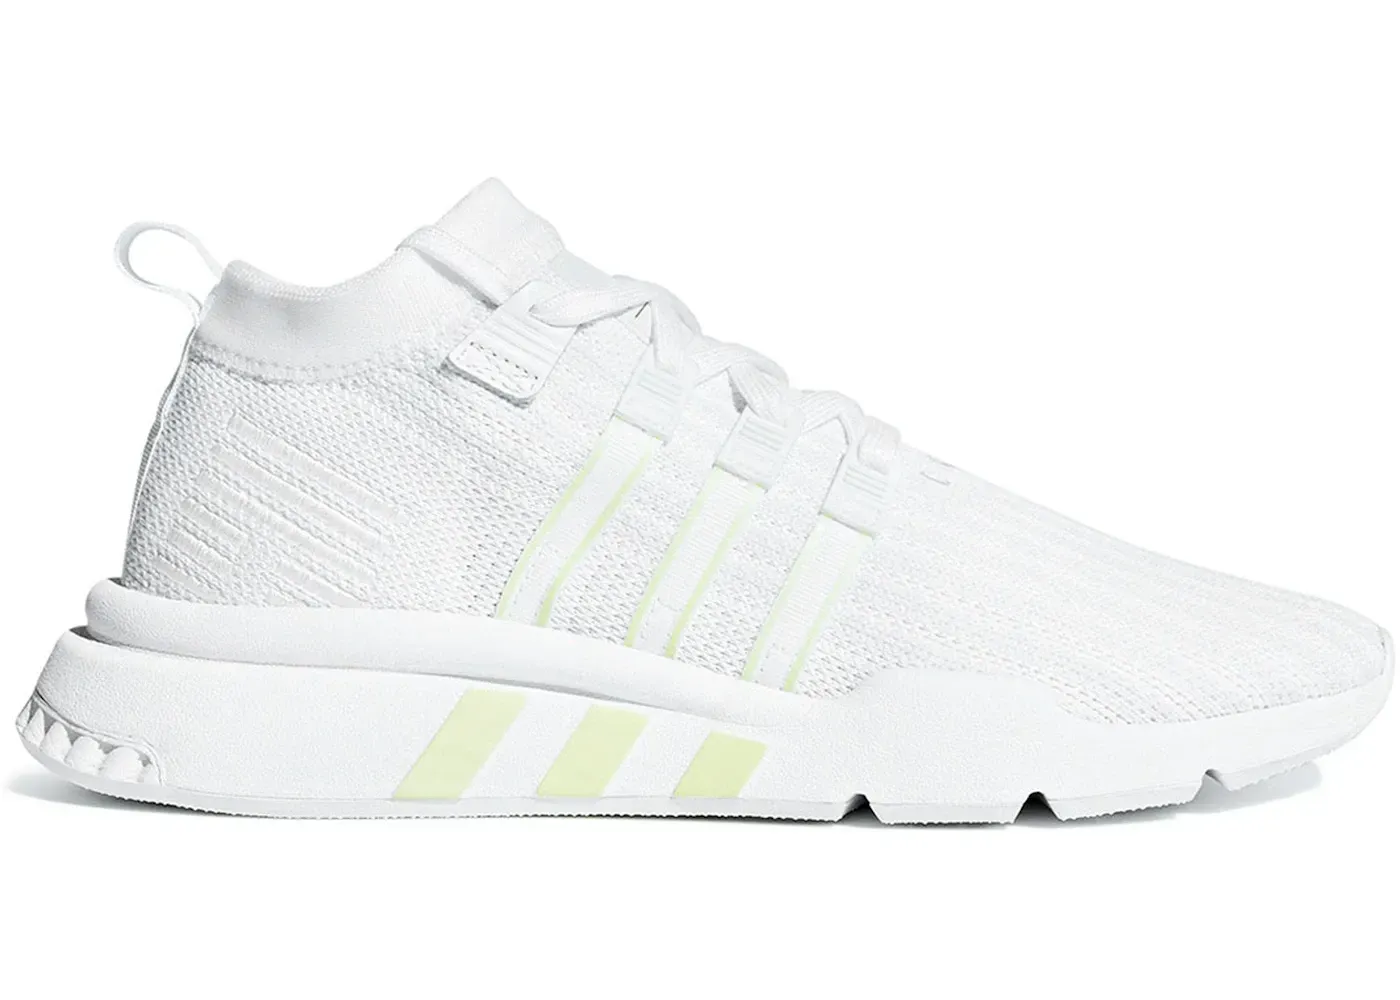 adidas EQT Support Mid Adv Cloud White